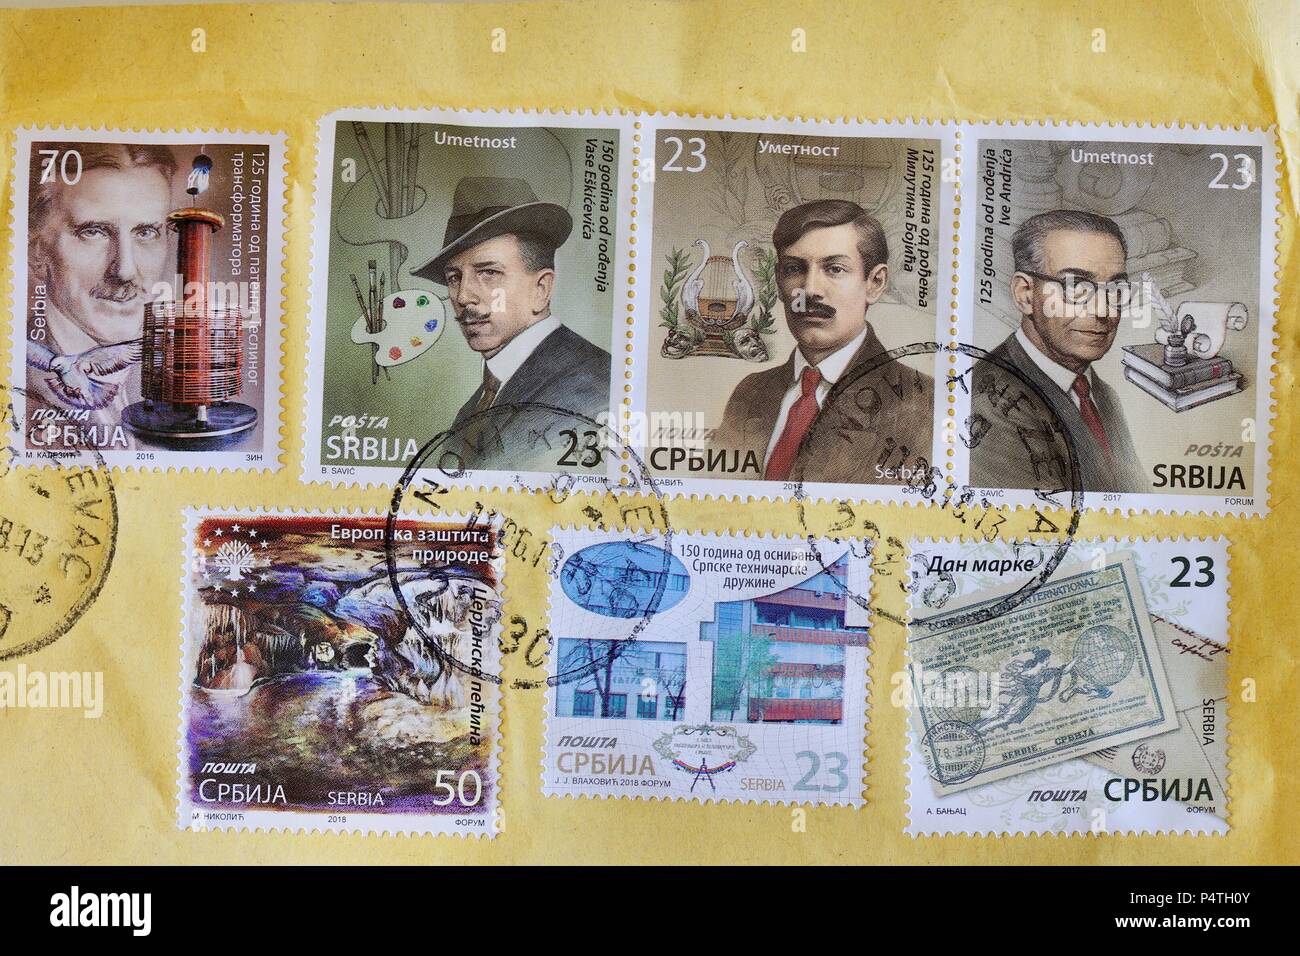 Serbian postage stamps on an envelope. Postmarked June 2018. Stock Photo